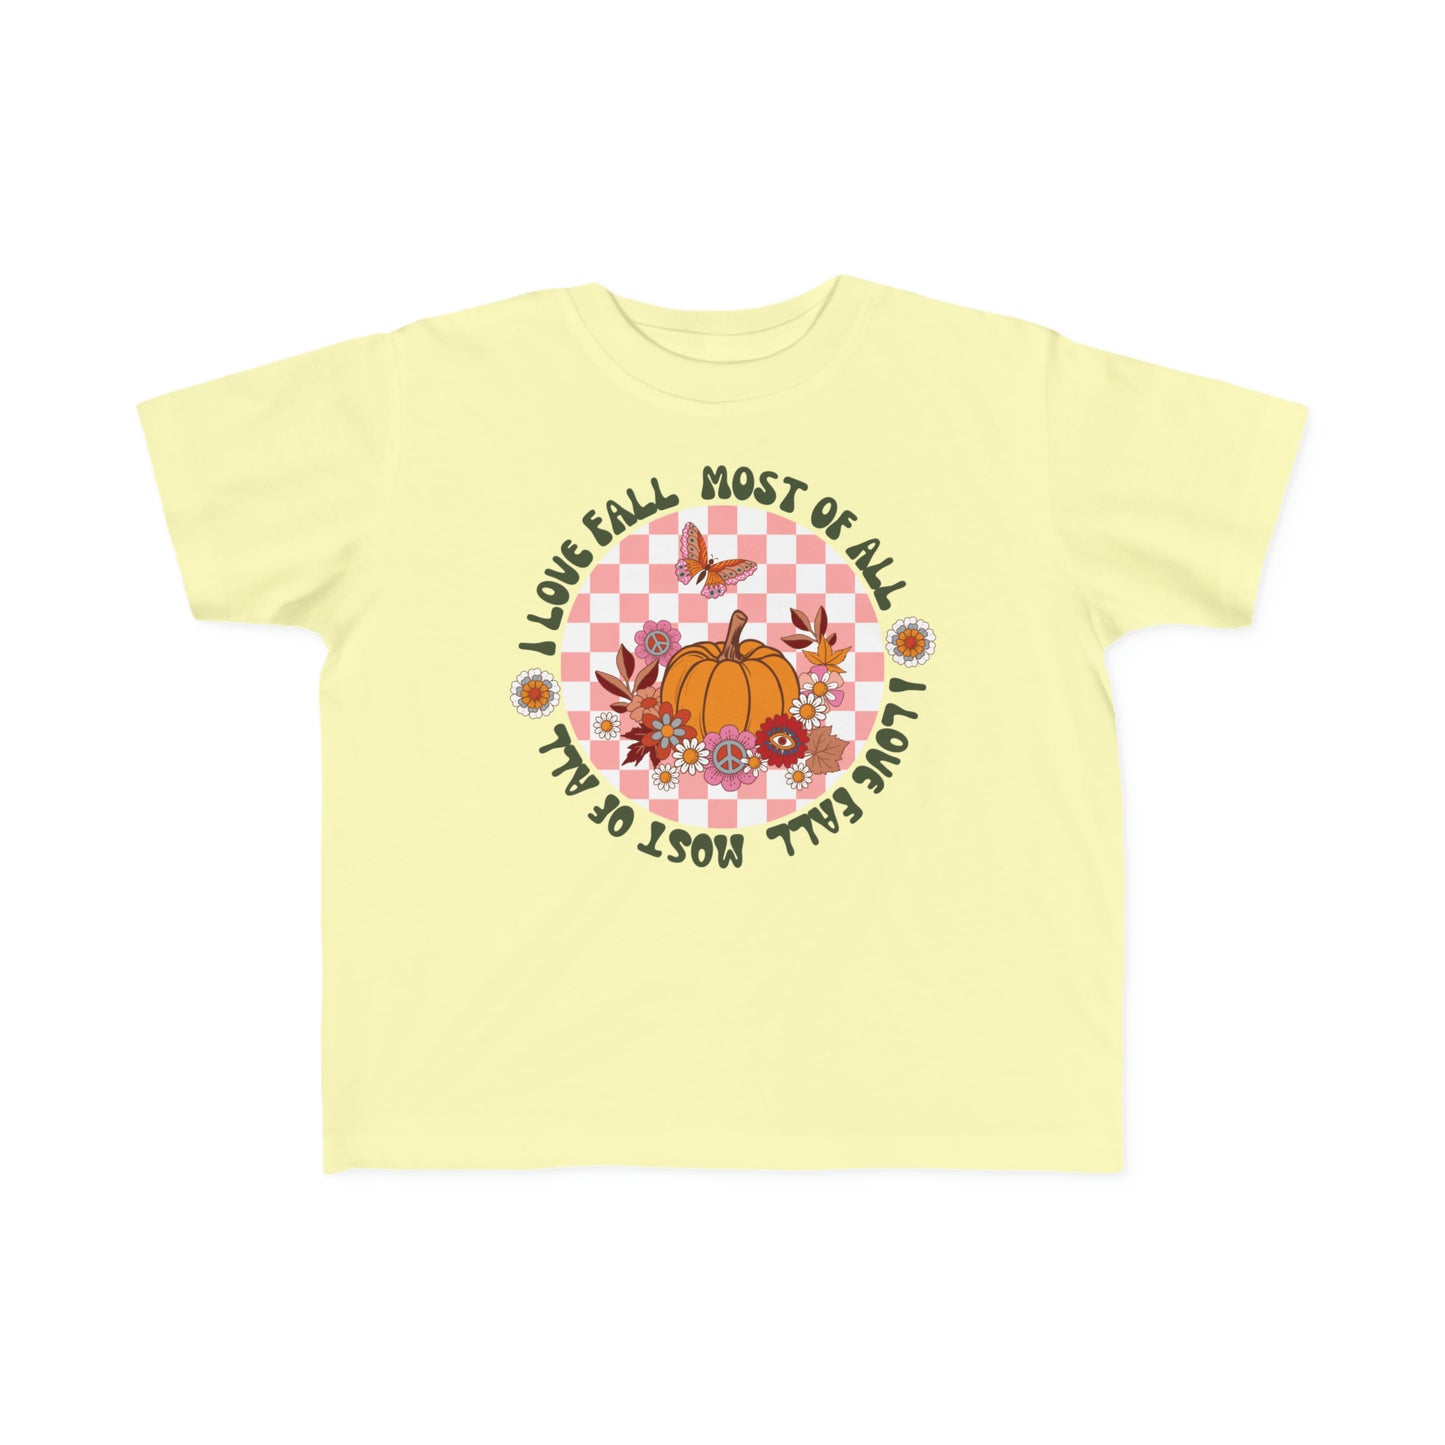 I Love Fall Most of All Peace  Toddler's Fine Jersey Tee